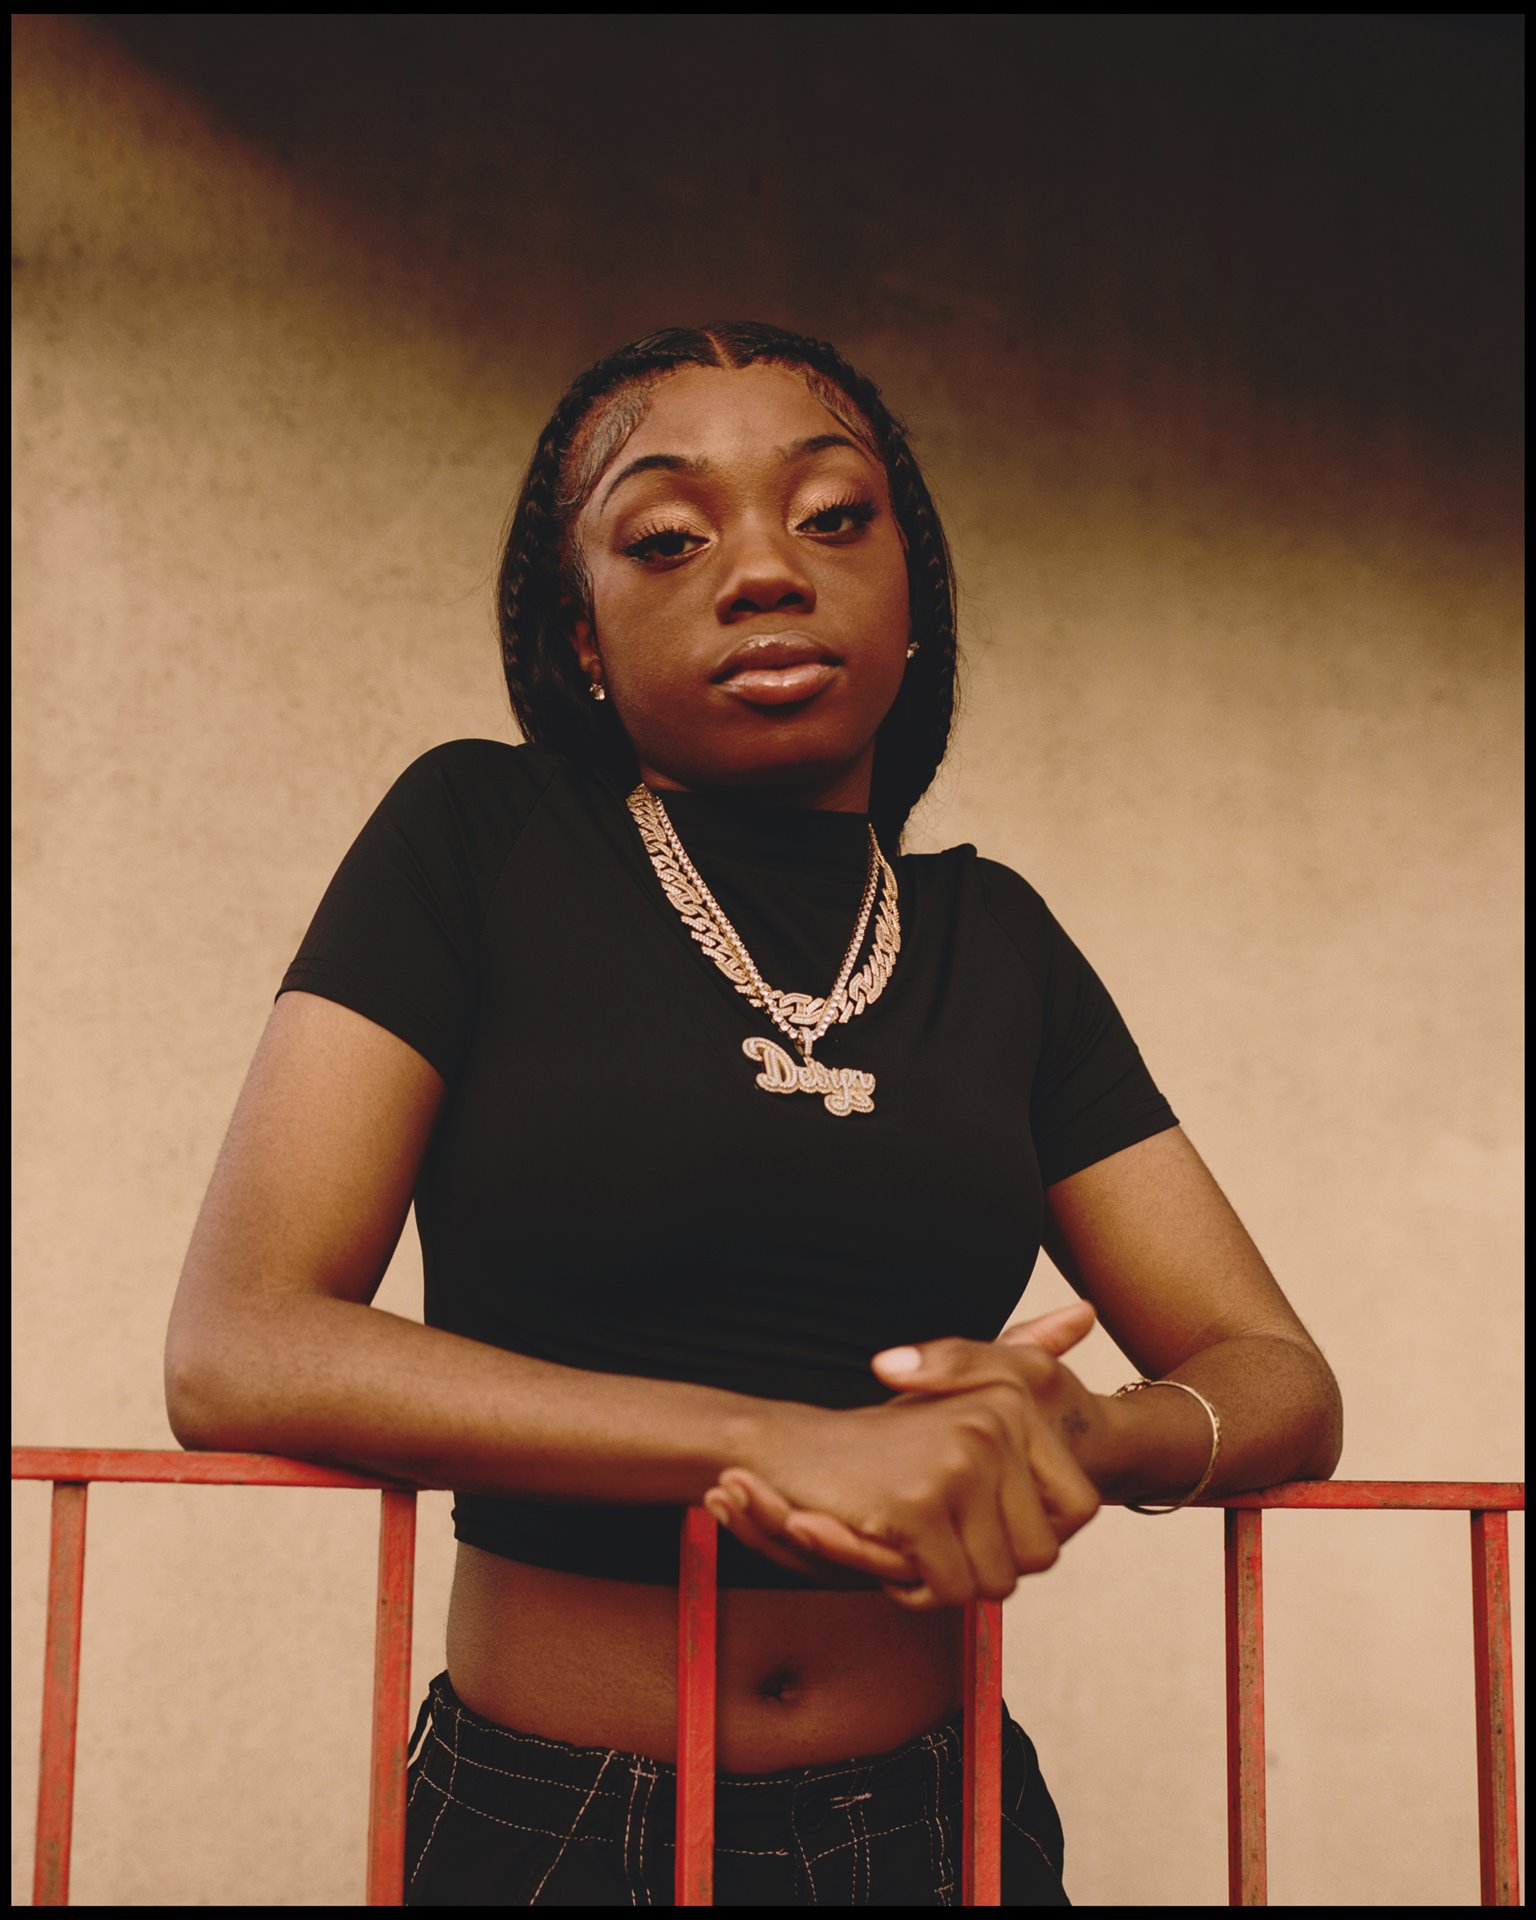 <p>Young Devyn (20) is inspired by her Caribbean heritage and dreams of making space for women in the drill scene. New York, United States.</p>
